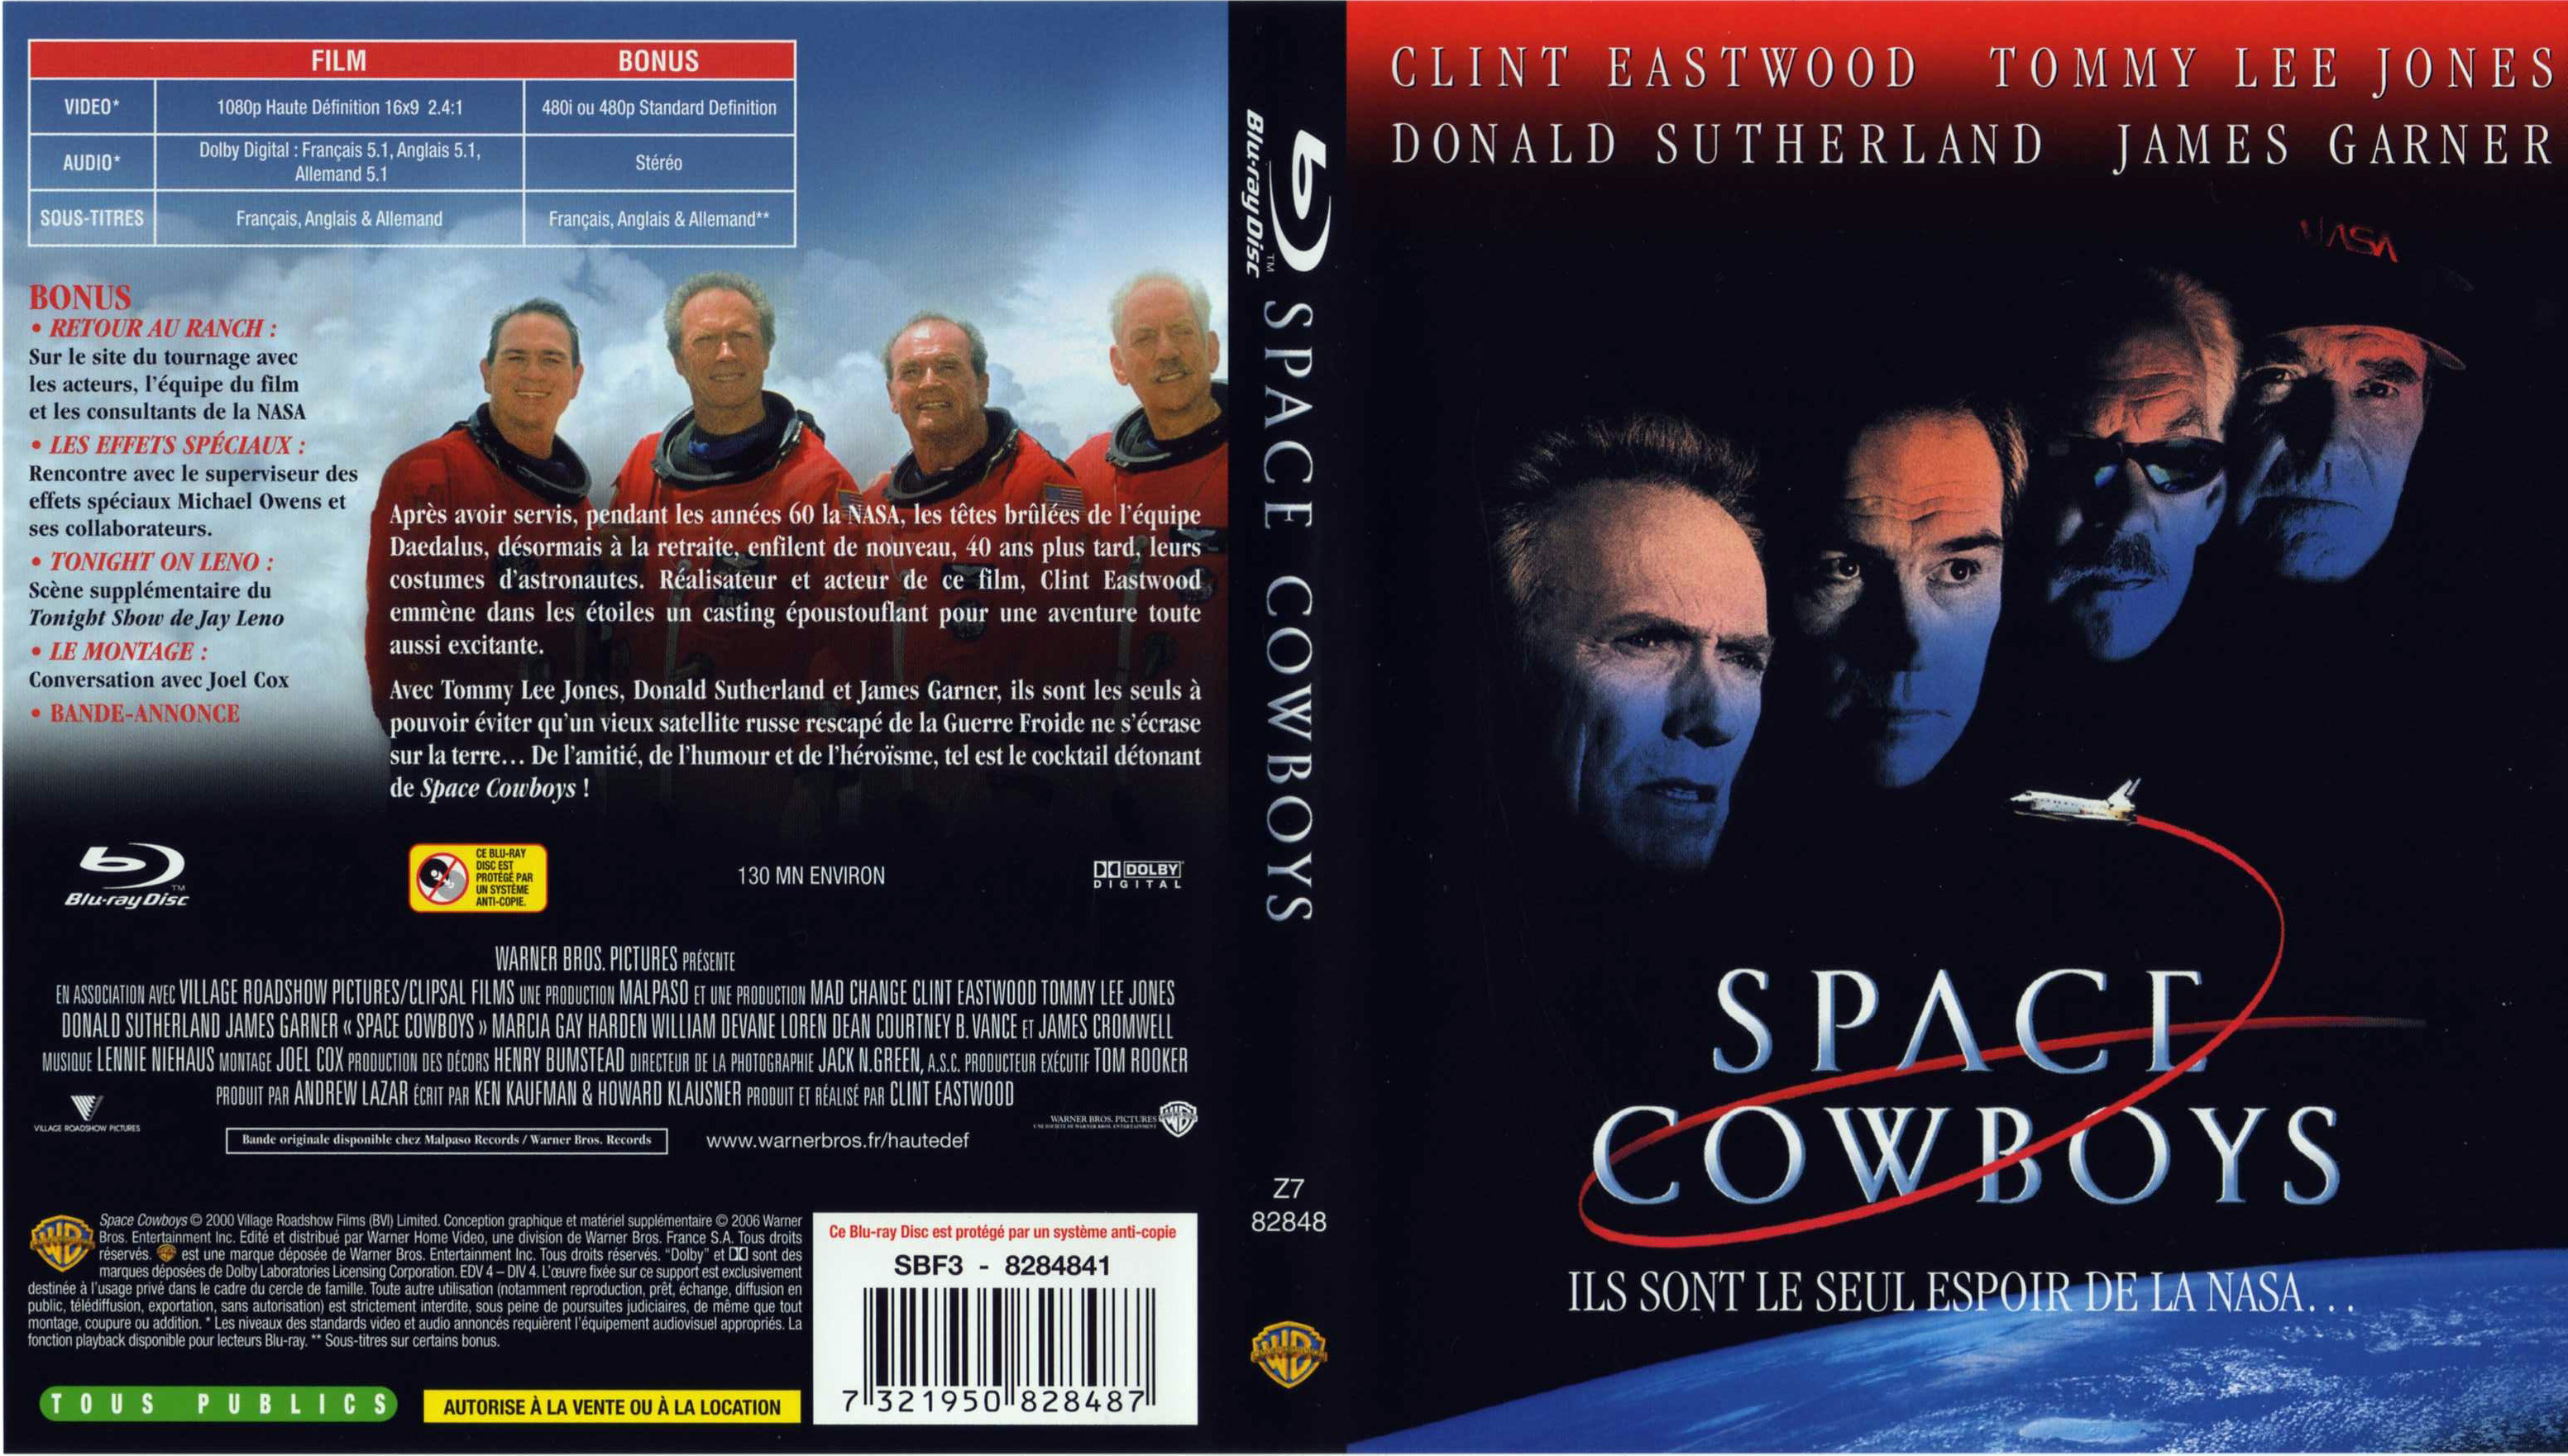 Jaquette DVD Space Cowboys (BLU-RAY)